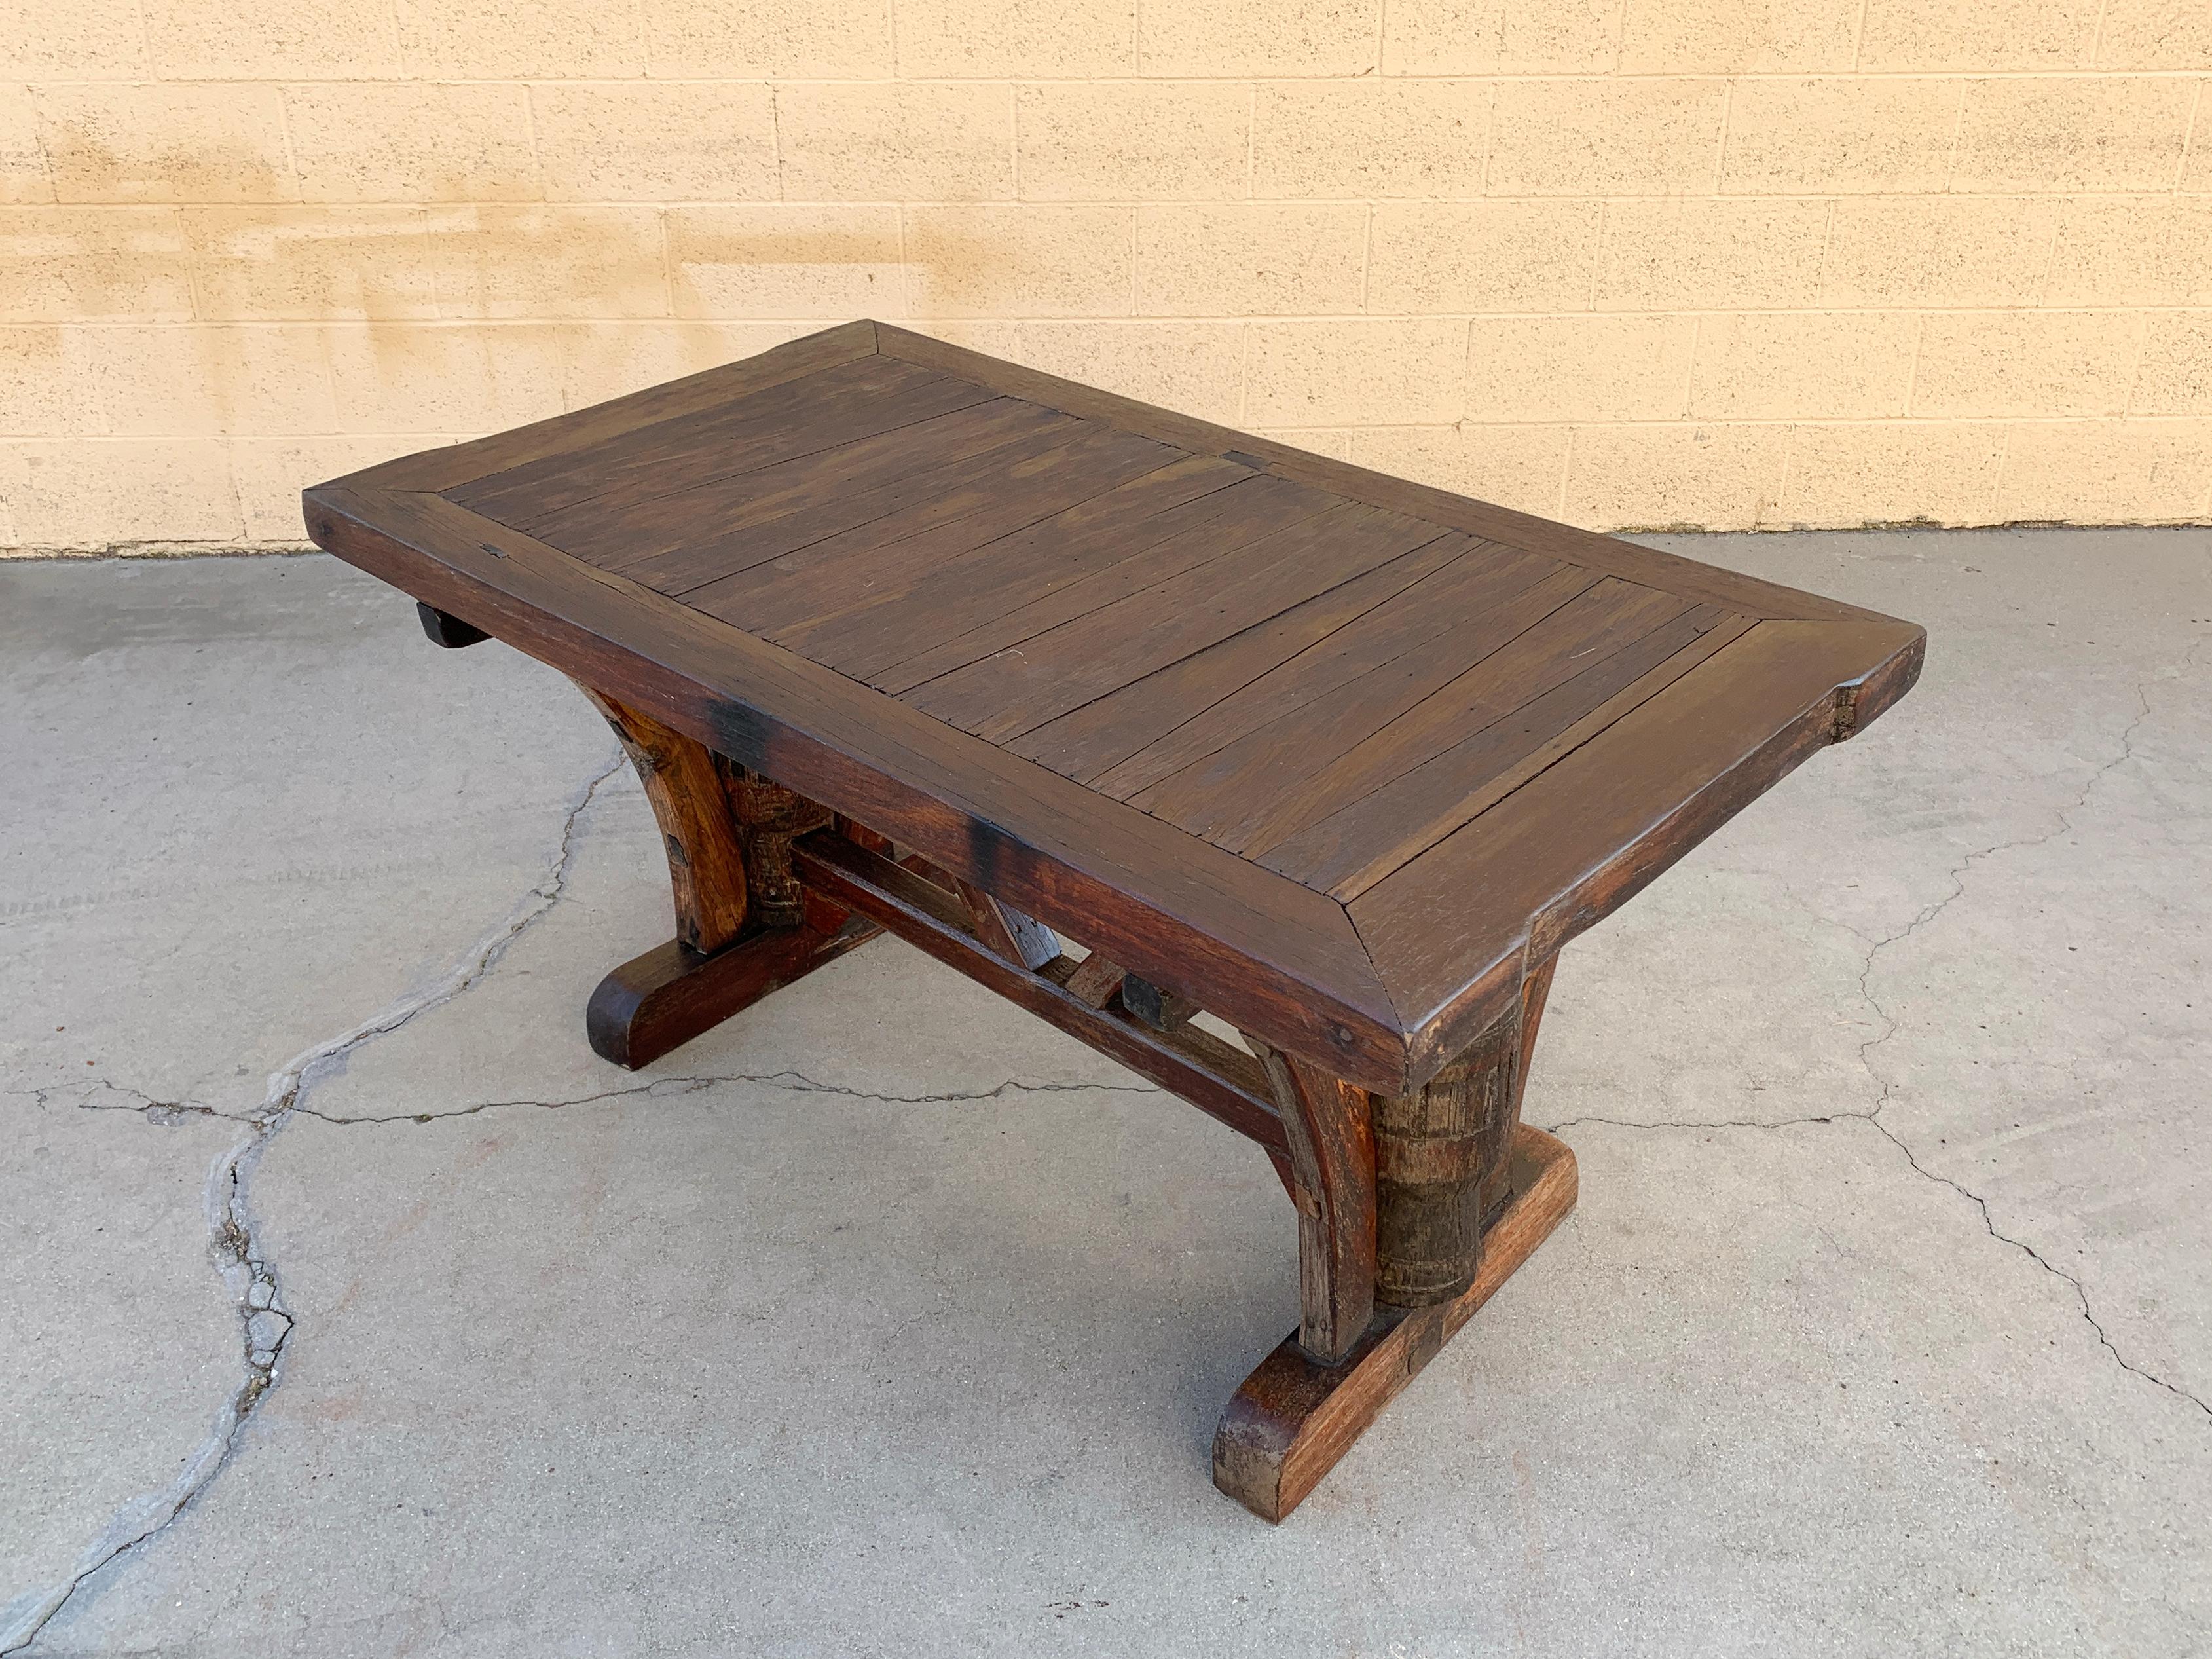 Rustic Indonesian Teak Dining Table Set with 4 Bench Seats